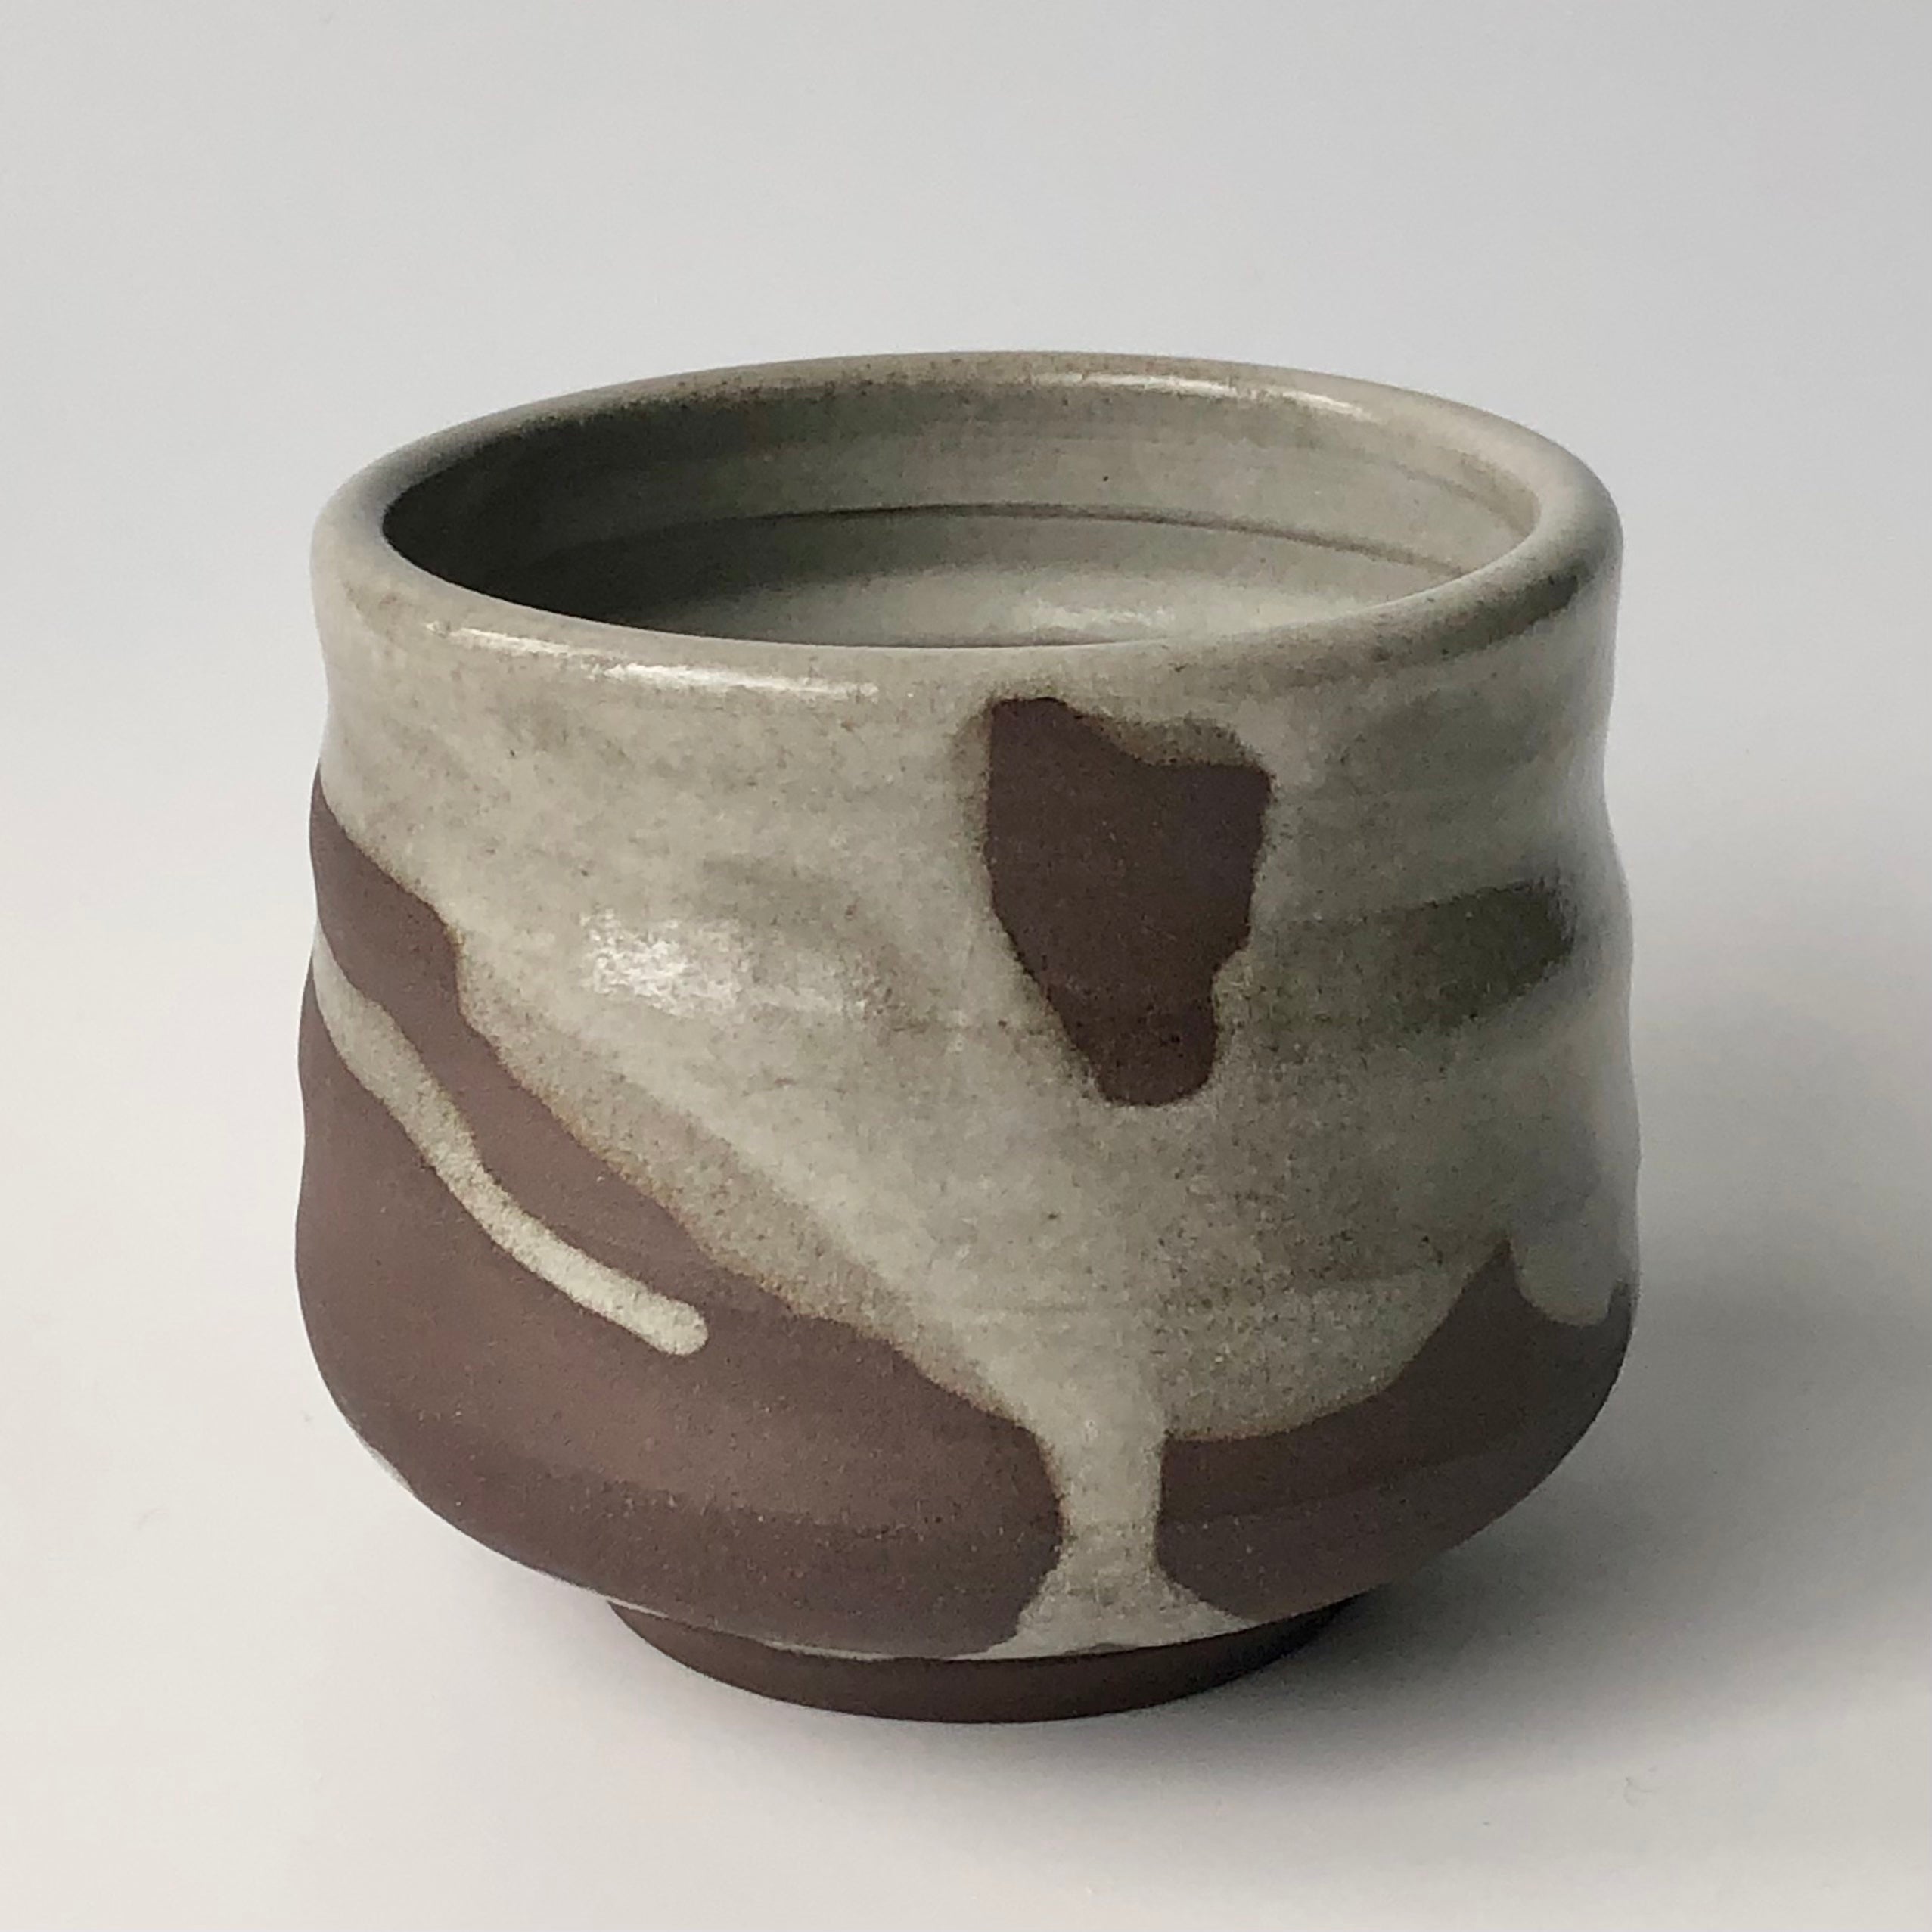 #3 Black Clay Chawan (Teabowl) Splashed with Apple Orchard Ash Glaze